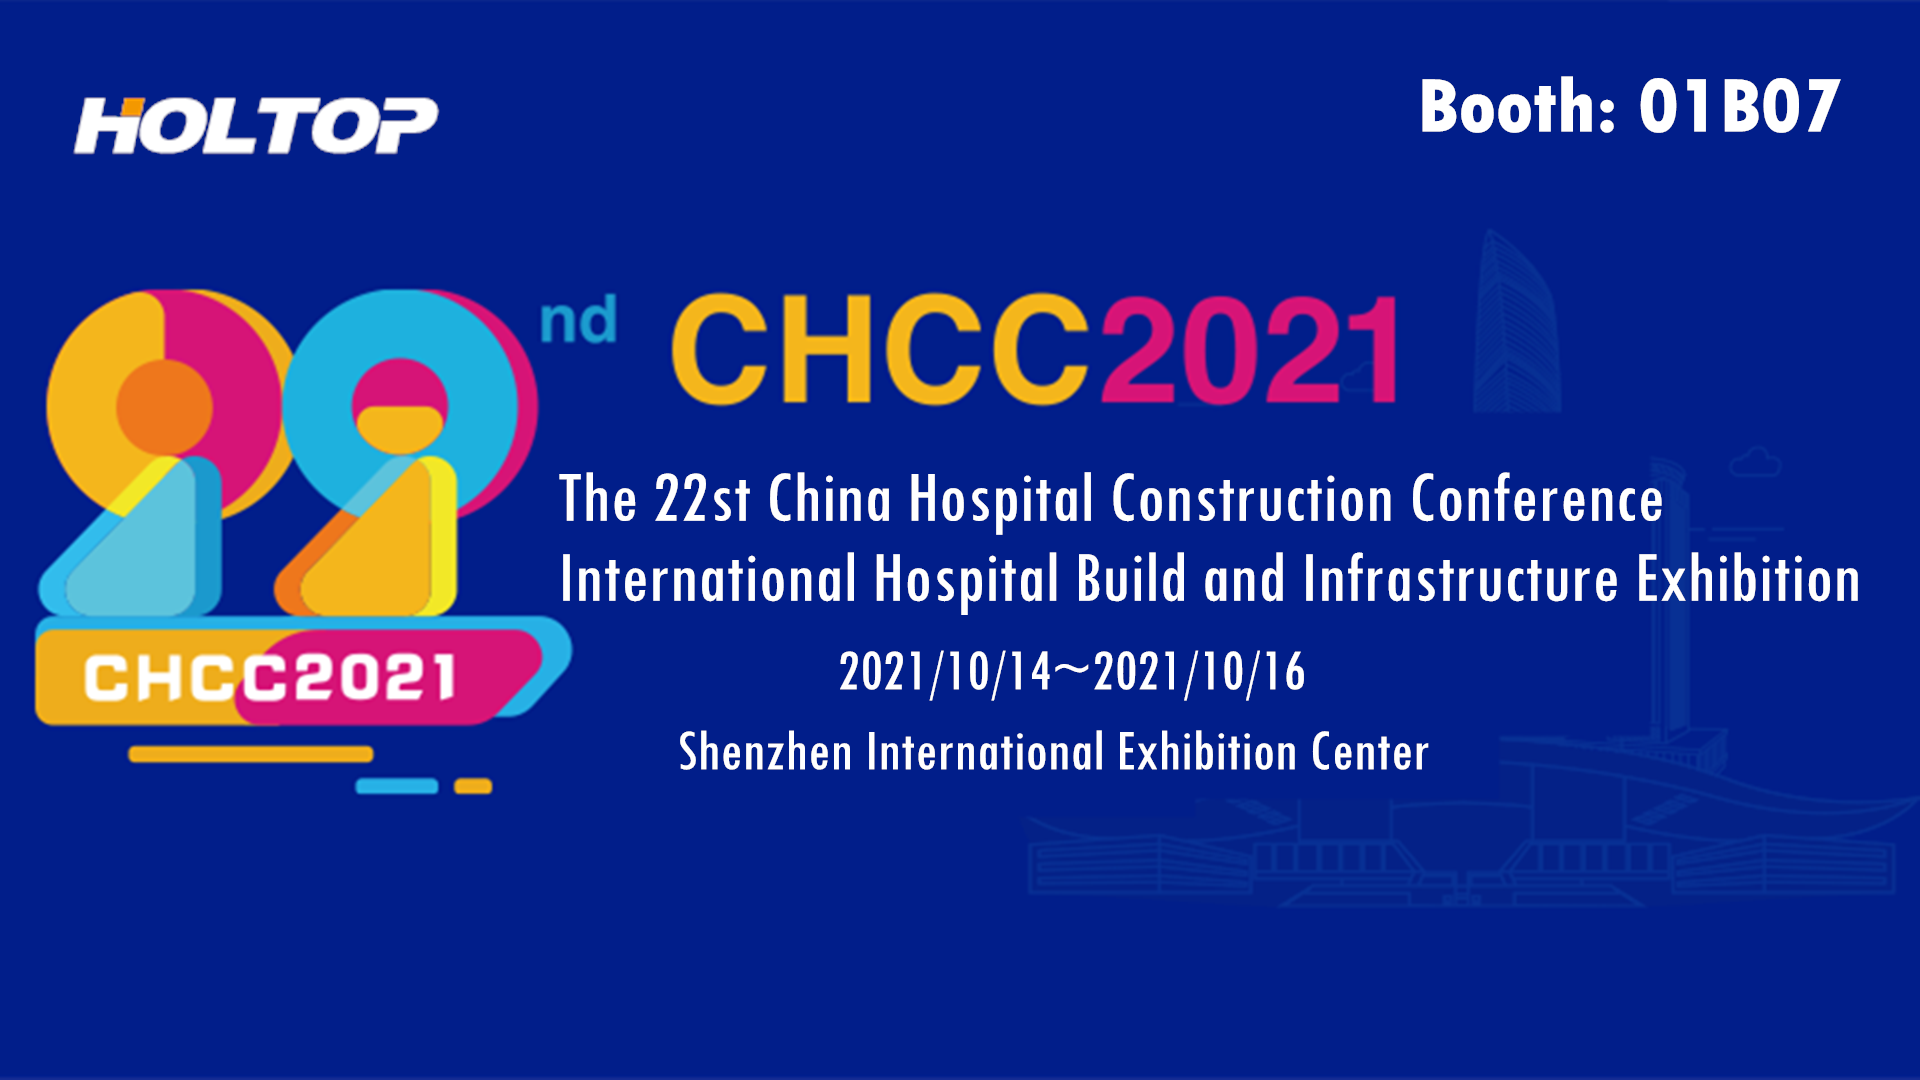 Holtop nimmt an der 22. China Hospital Construction Conference International Hospital Build and Infrastructure Exhibition (CHCC2021) teil